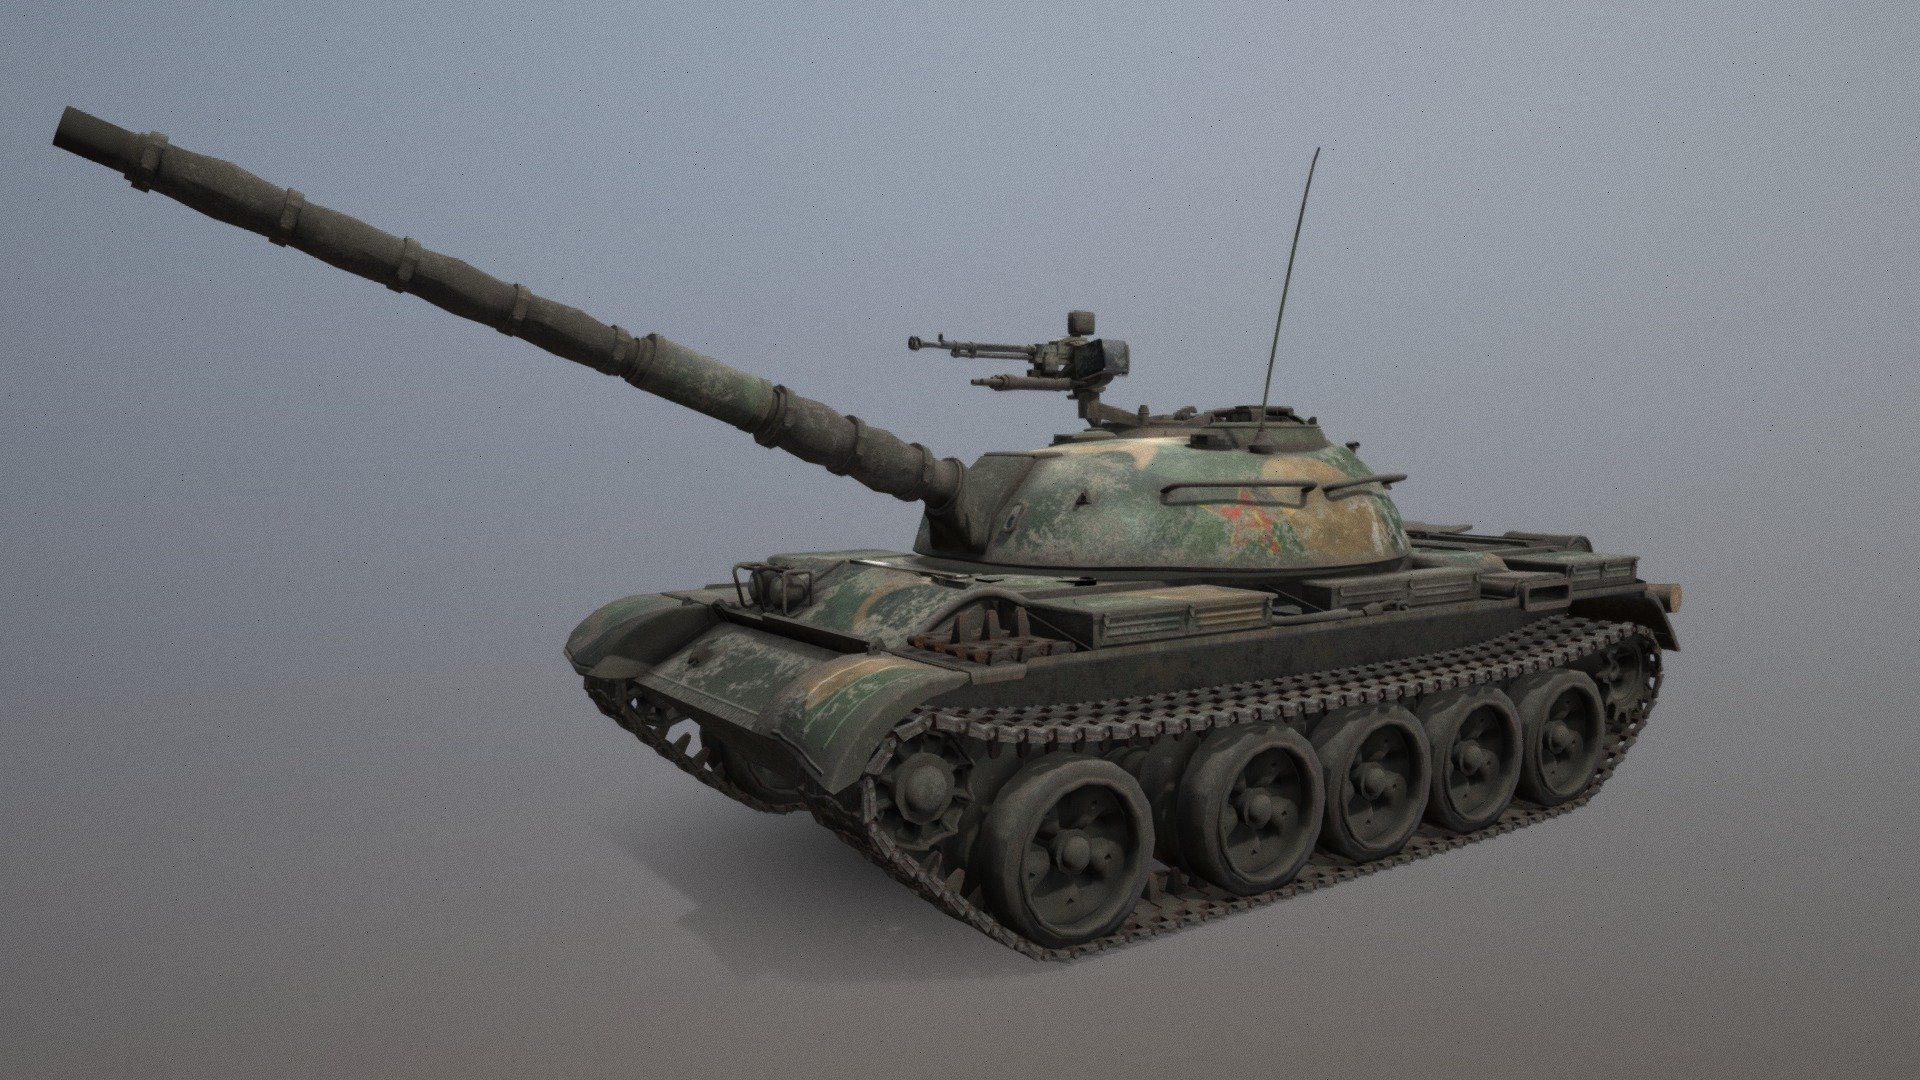 Hello, This is a Chinese Type 59 model i made. It was also called WZ-120. It is a licenced version of Russian T-55 tank. 
The model has simple rig that rotates the turret, gun and the anti air gun on it's turret.
The model has a 1K, 2K and 4K sets of pbr textures.
The vert count is as follows:
Tank: 25111
Track: 43740 - Type 59 / WZ-120 - Chinese Main Battle Tank - 3D model by Szyszz 3d model